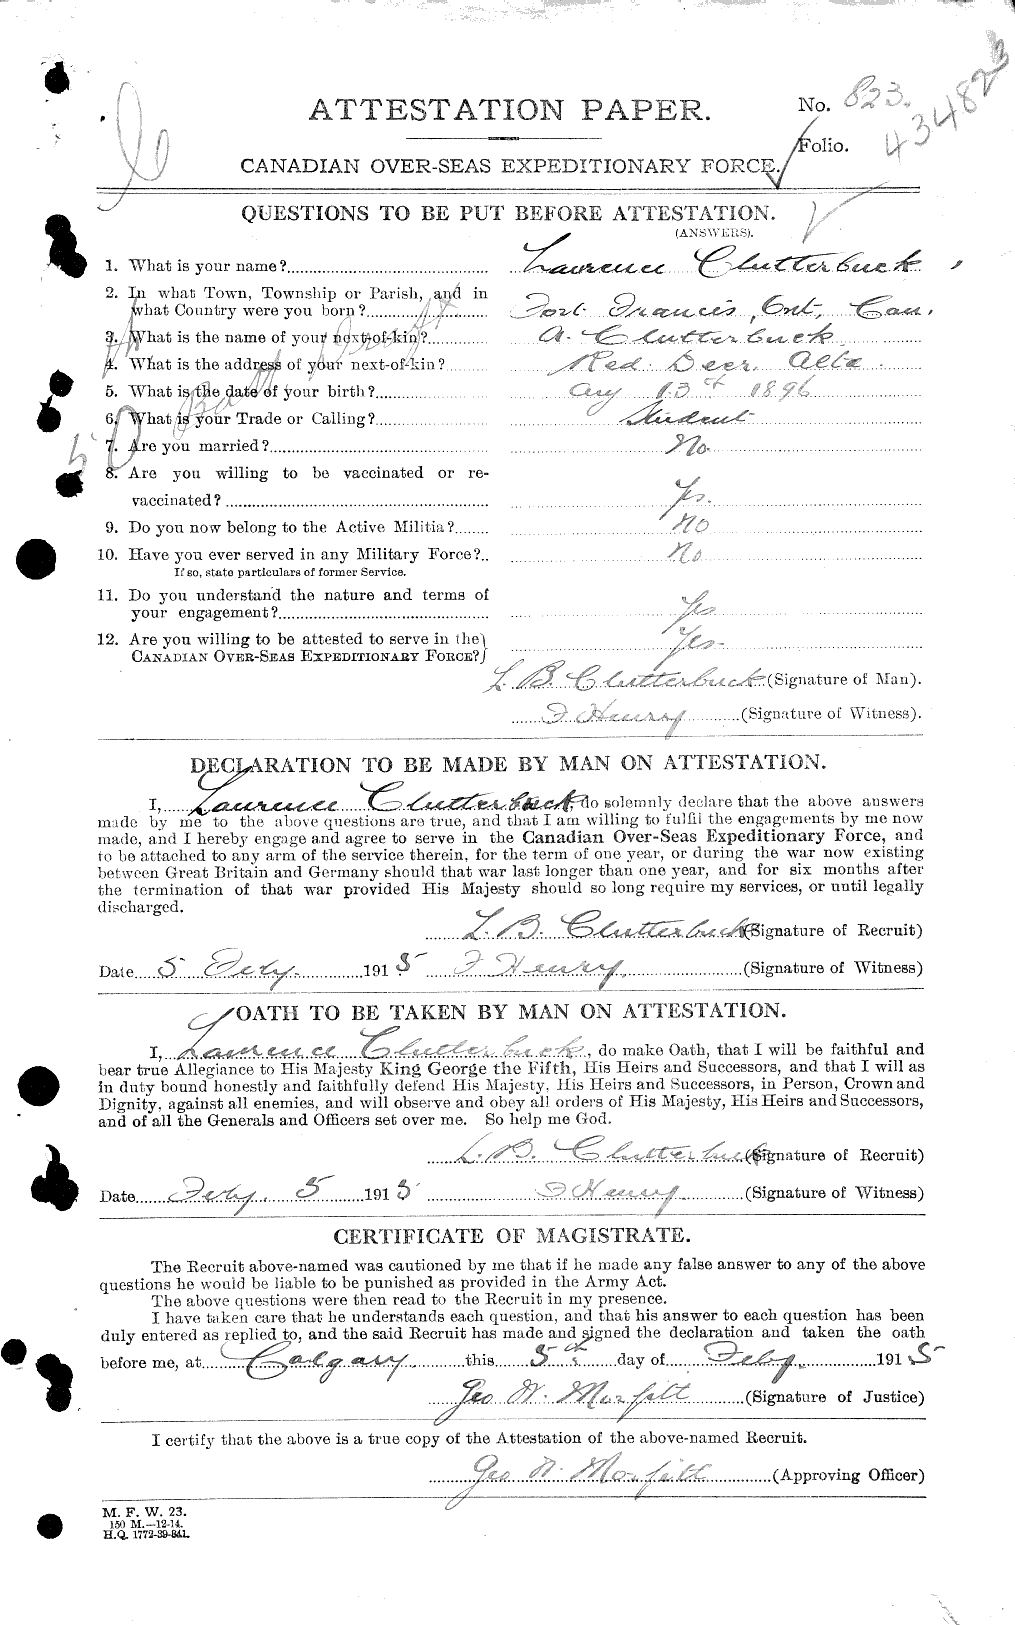 Personnel Records of the First World War - CEF 026282a